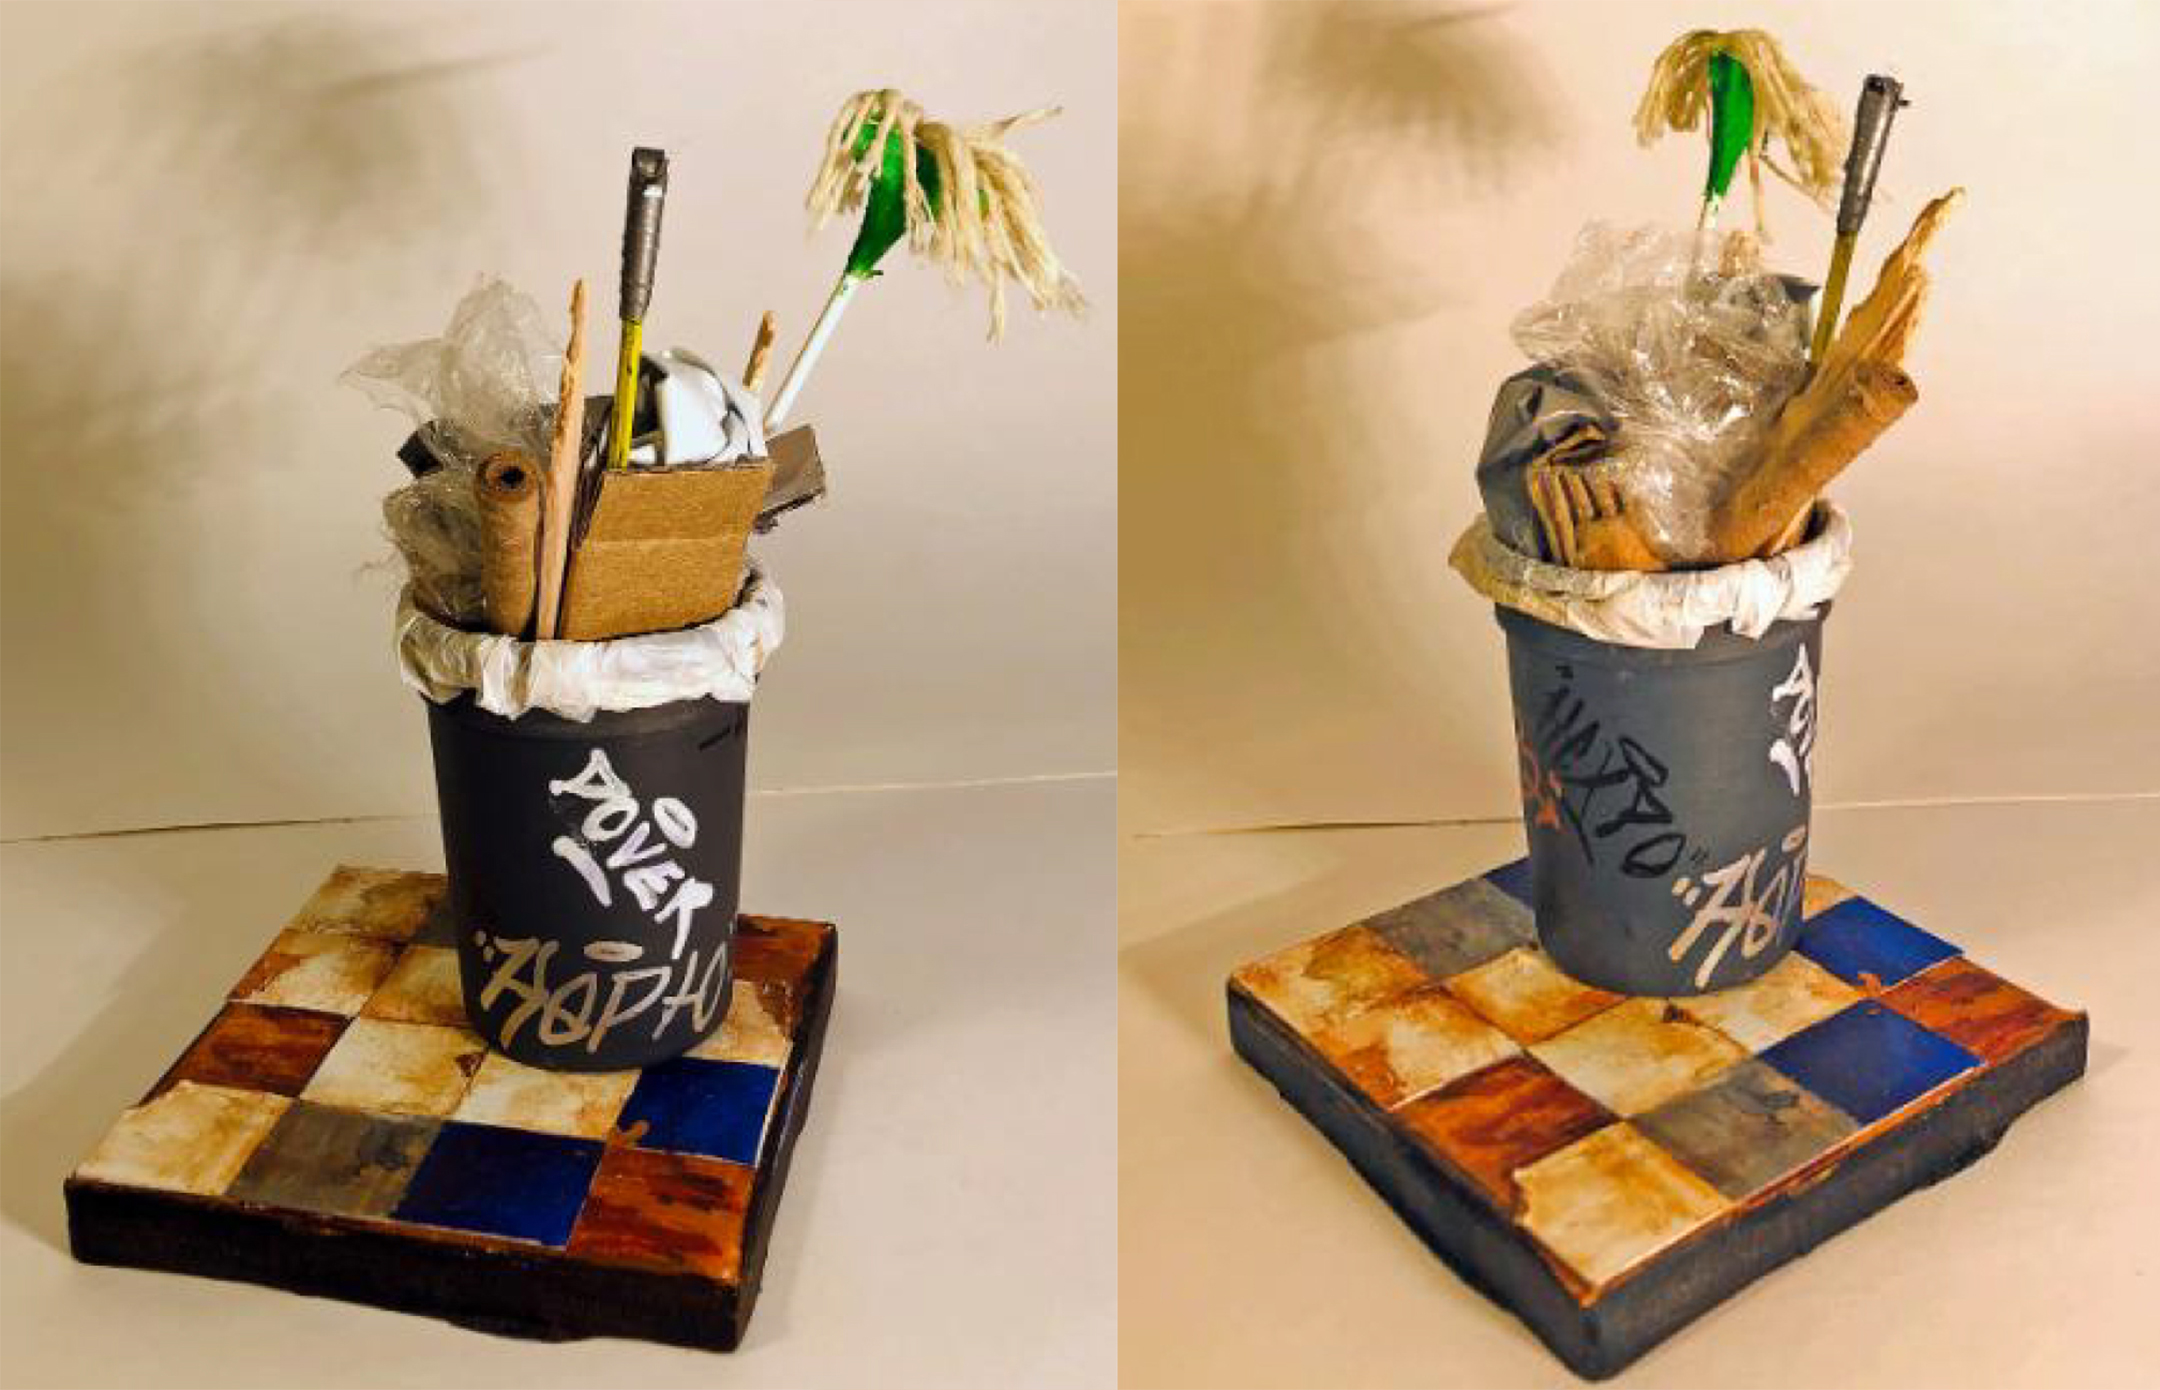 A miniature reproduction of a plastic trash can with mops and brooms sticking out of it 